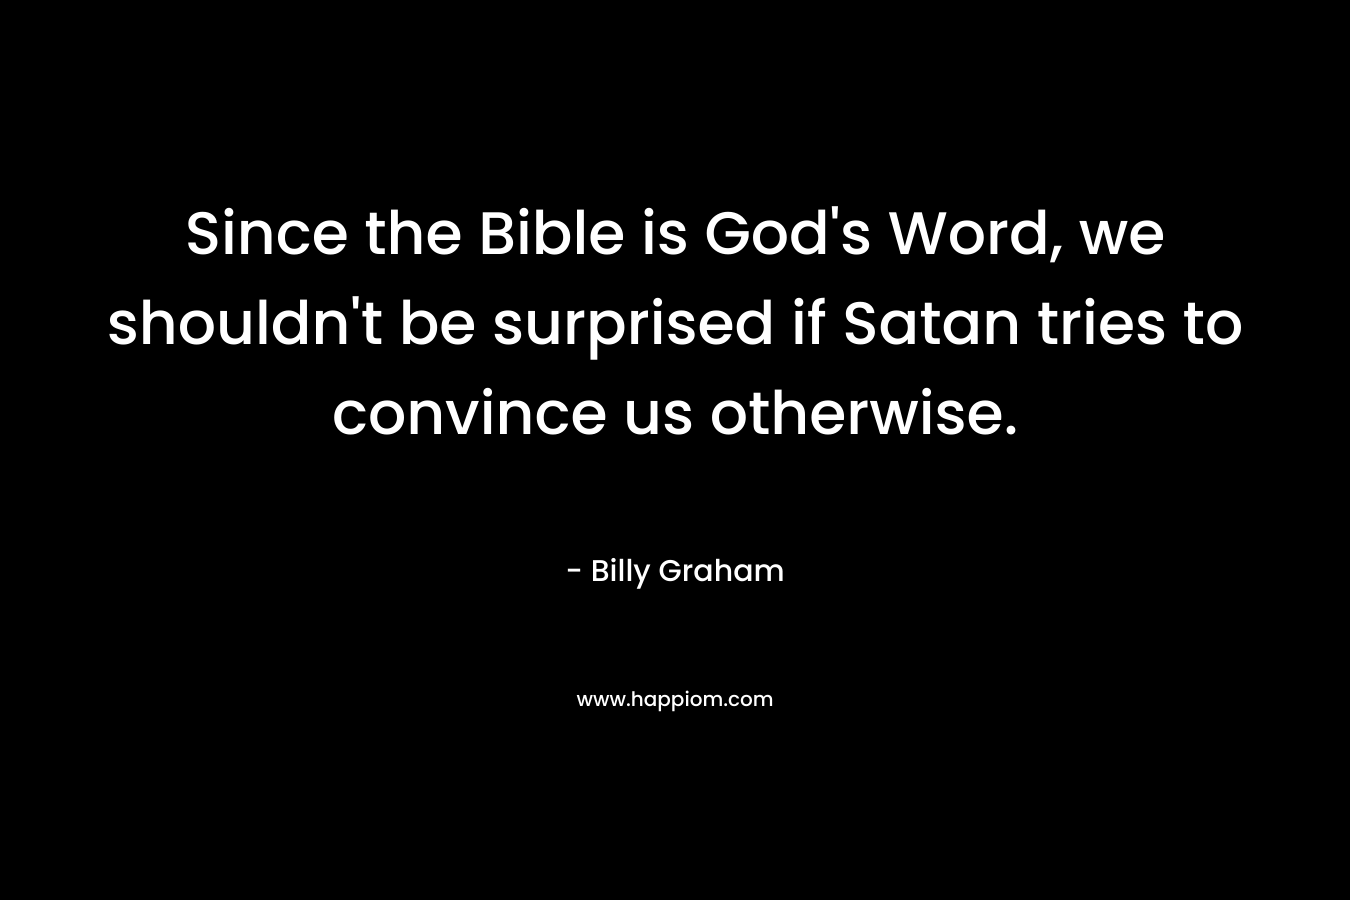 Since the Bible is God's Word, we shouldn't be surprised if Satan tries to convince us otherwise.